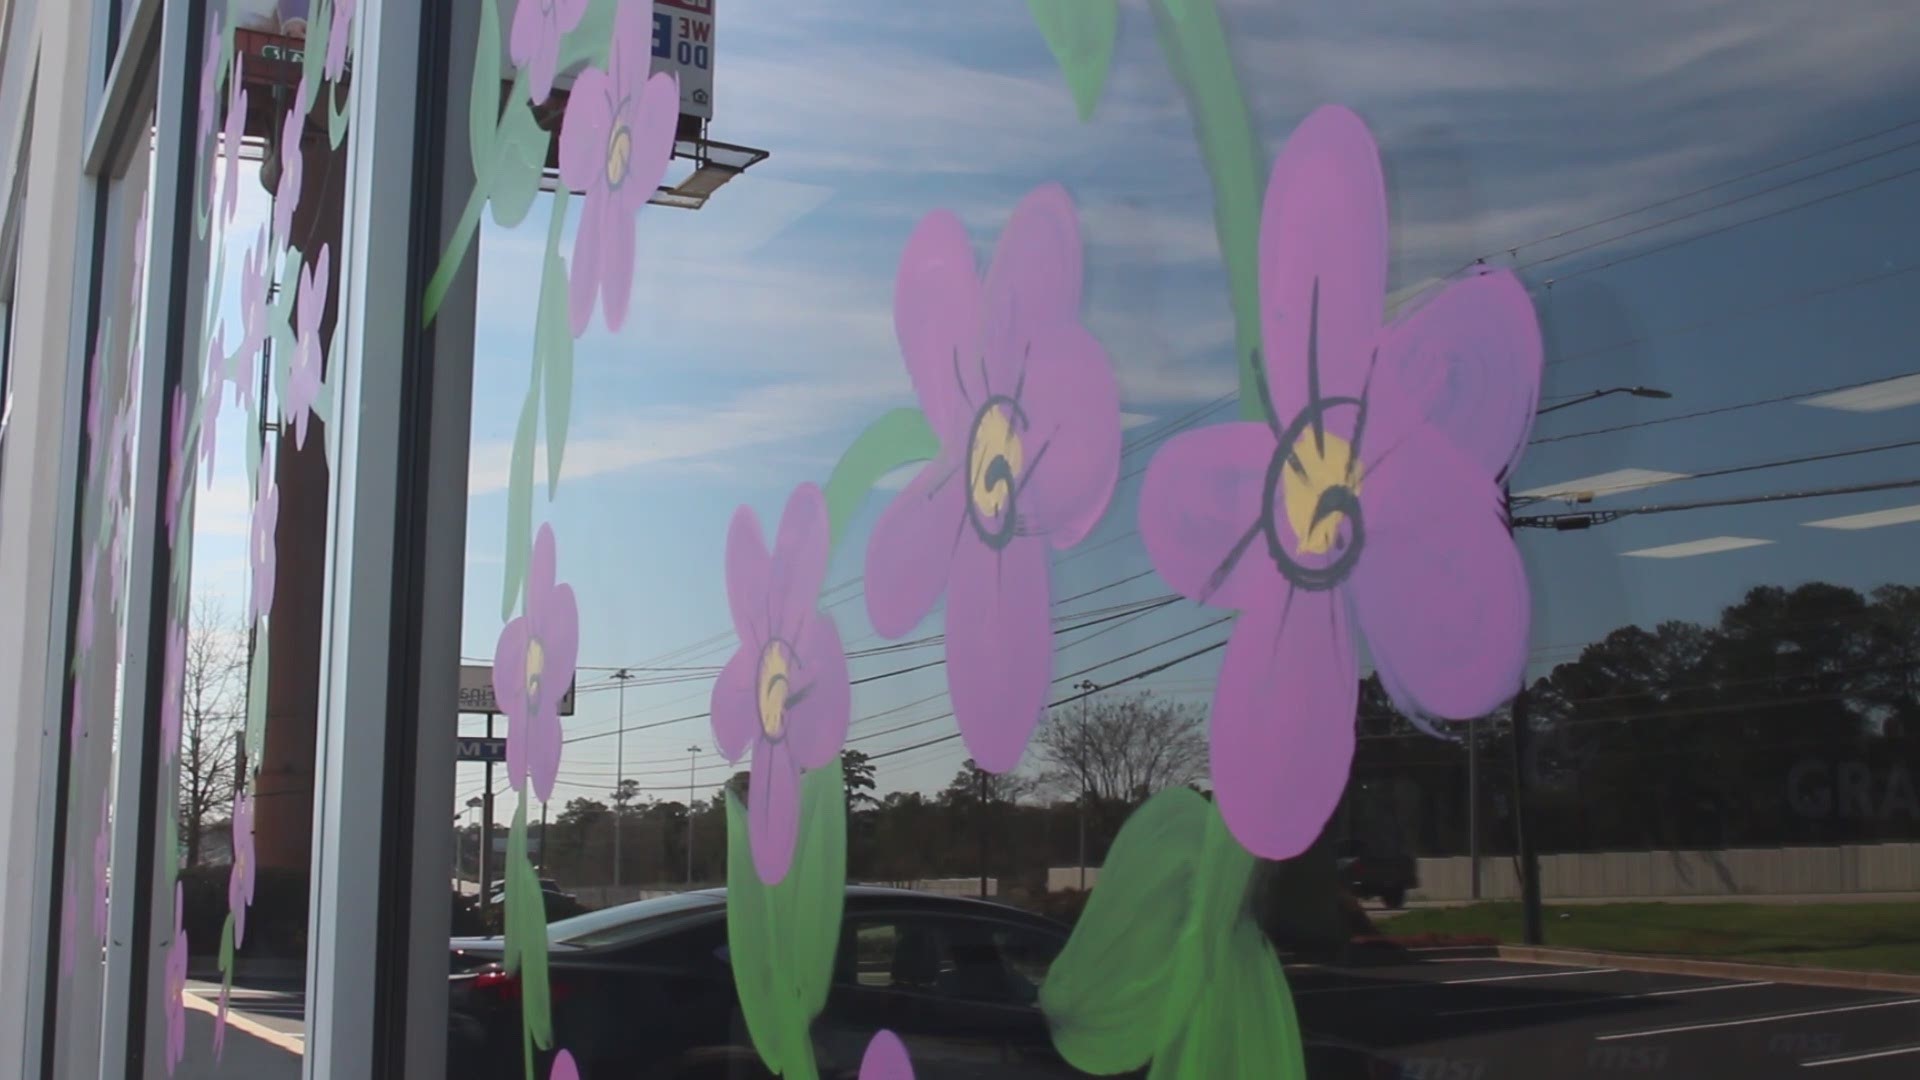 As Macon gets into Cherry Blossom Festival season, we were 'just curious' about who paints the murals of cherry blossoms on buildings and cars.